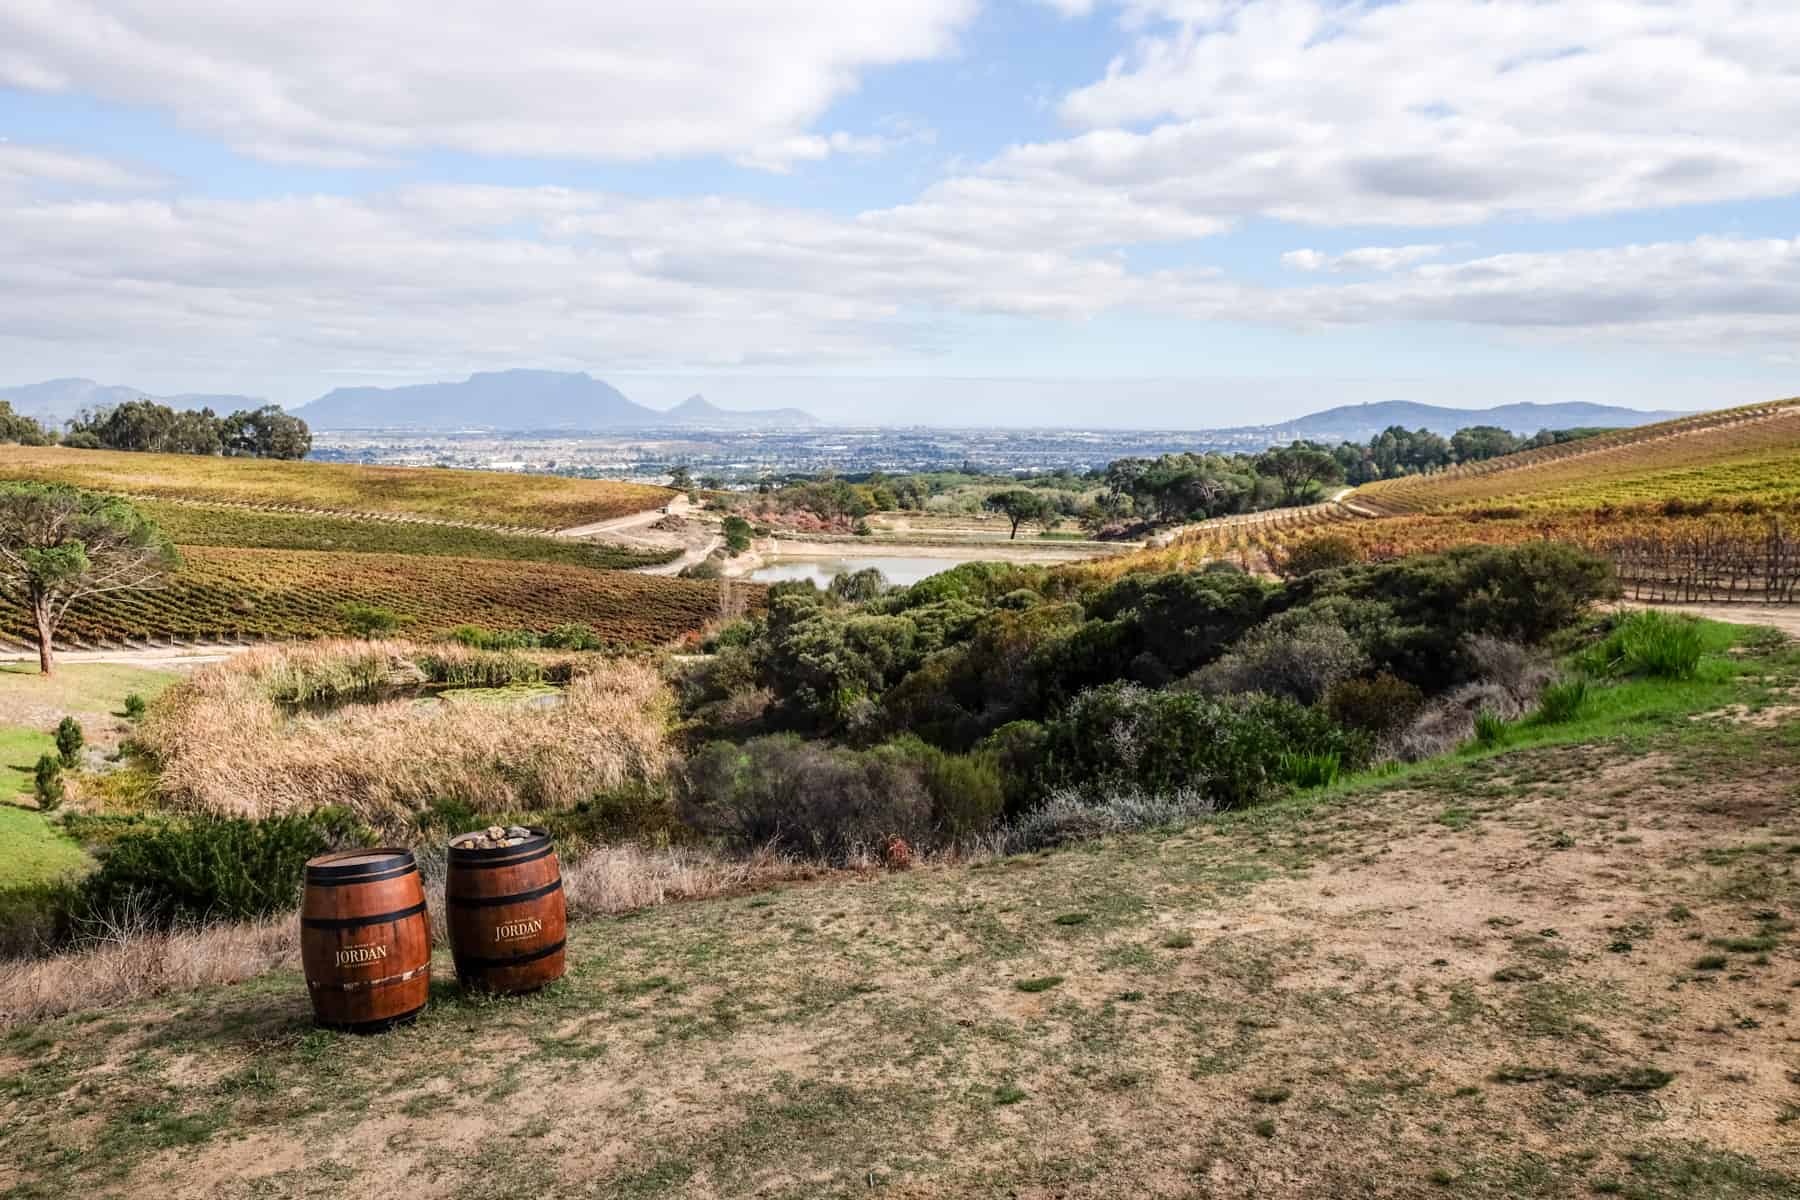 Two dark wooden barrels on the left, bearing the name of the Jordan Wine Estate in Stellenbosch stand alone on yellow-green slope with a bunch of green vine rows - part of a patchwork of yellow, orange and green fields that make up a vast vineyards area. 